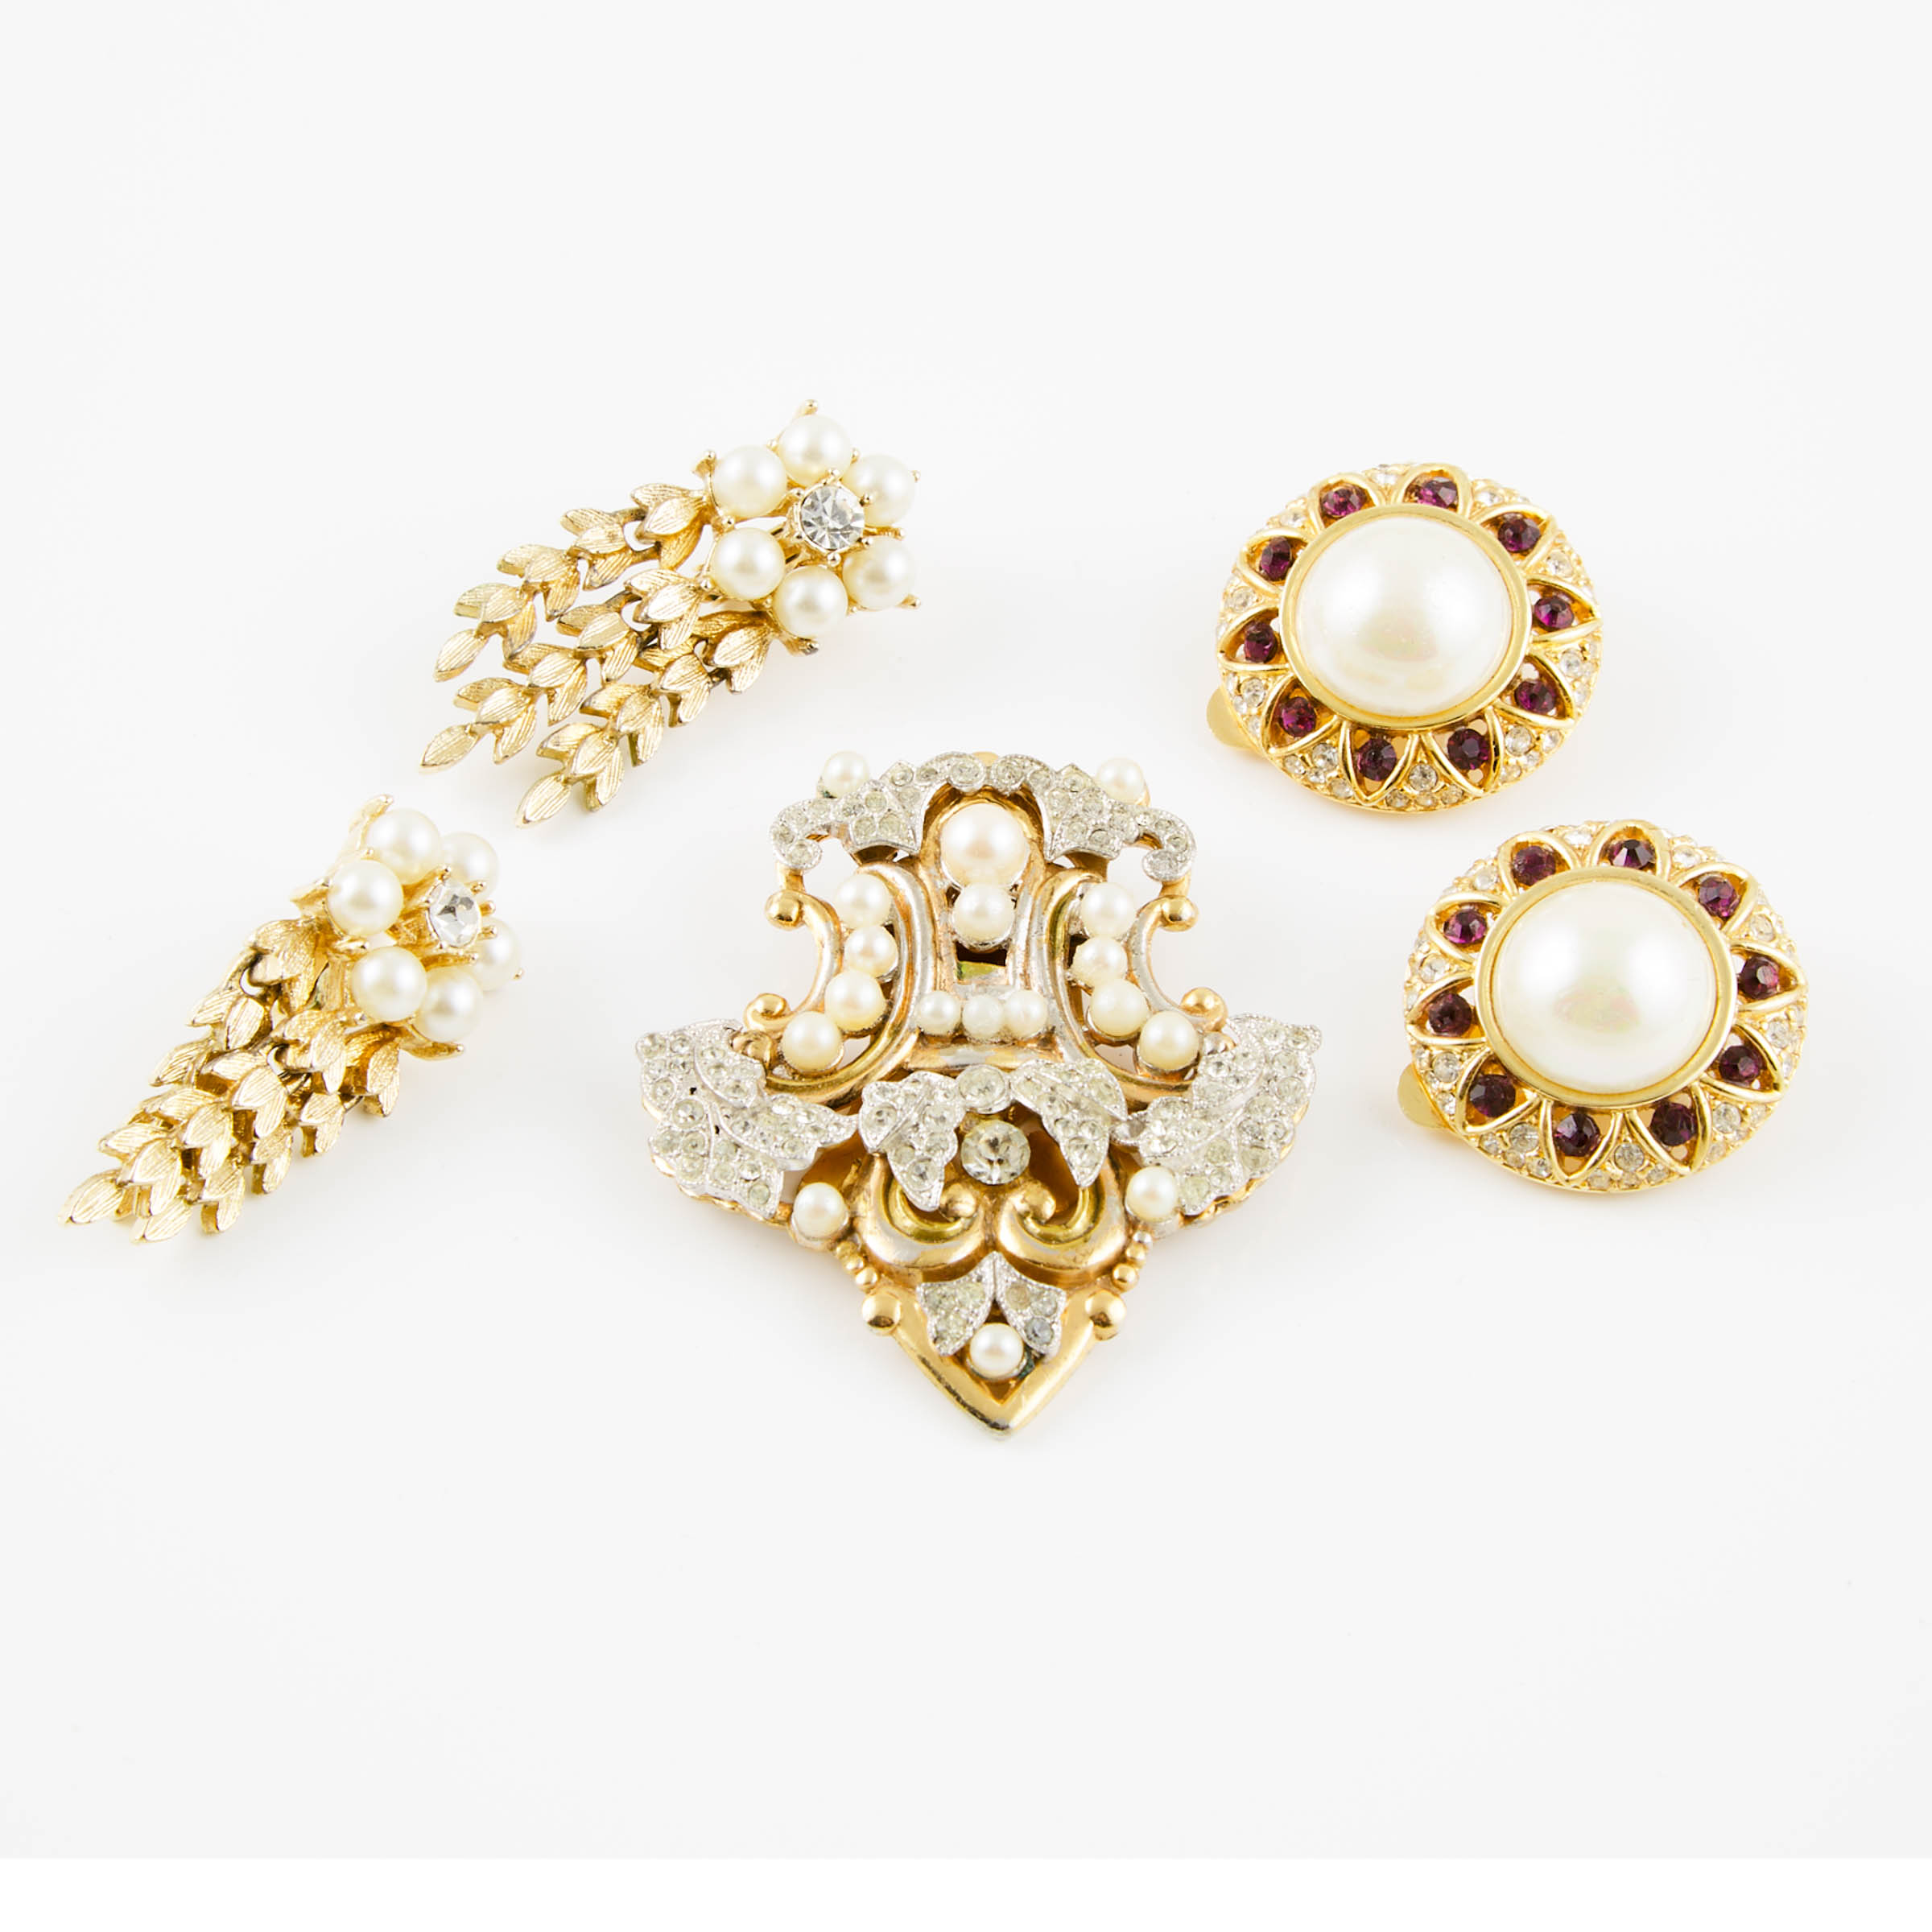 Small Group Of Gold-Tone Metal Jewellery